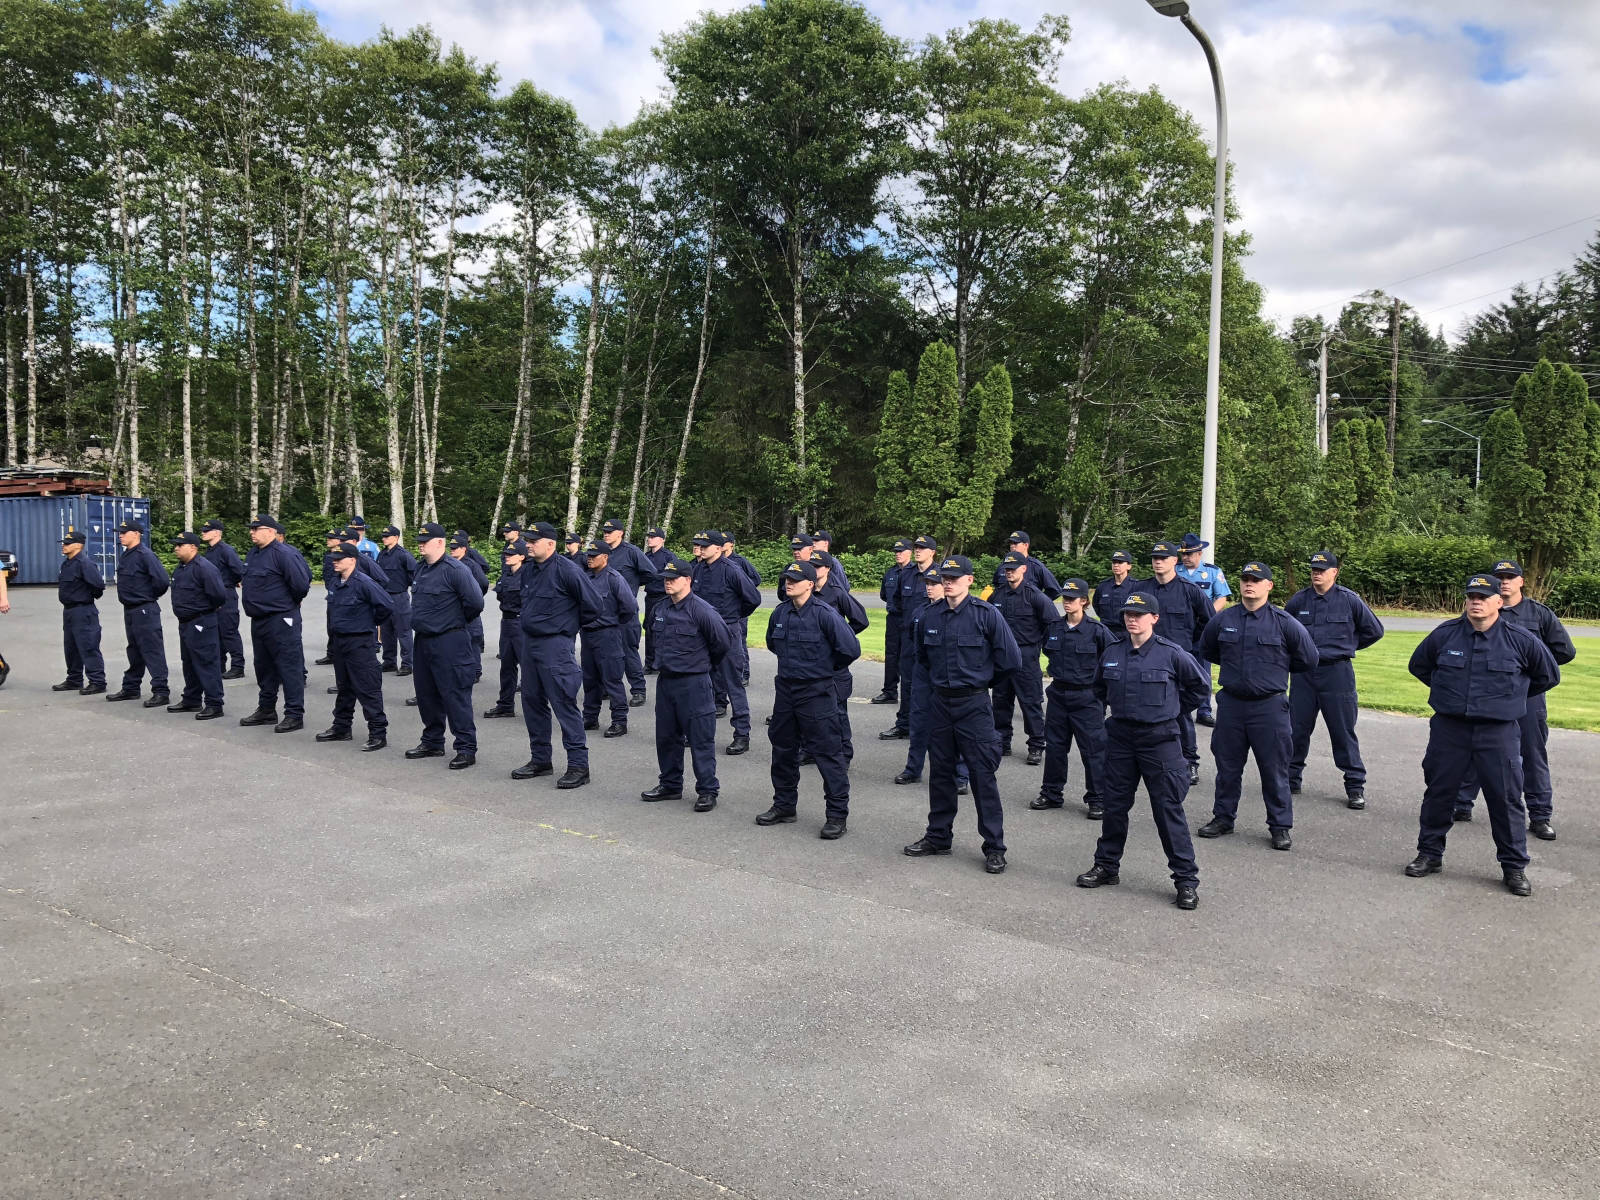 Alaska Law Enforcement Training Academy recruits stand at attention on July 30, 2018, the first day of training at the Public Safety Training Academy in Sitka, Alaska. (Alaska State Troopers photo)